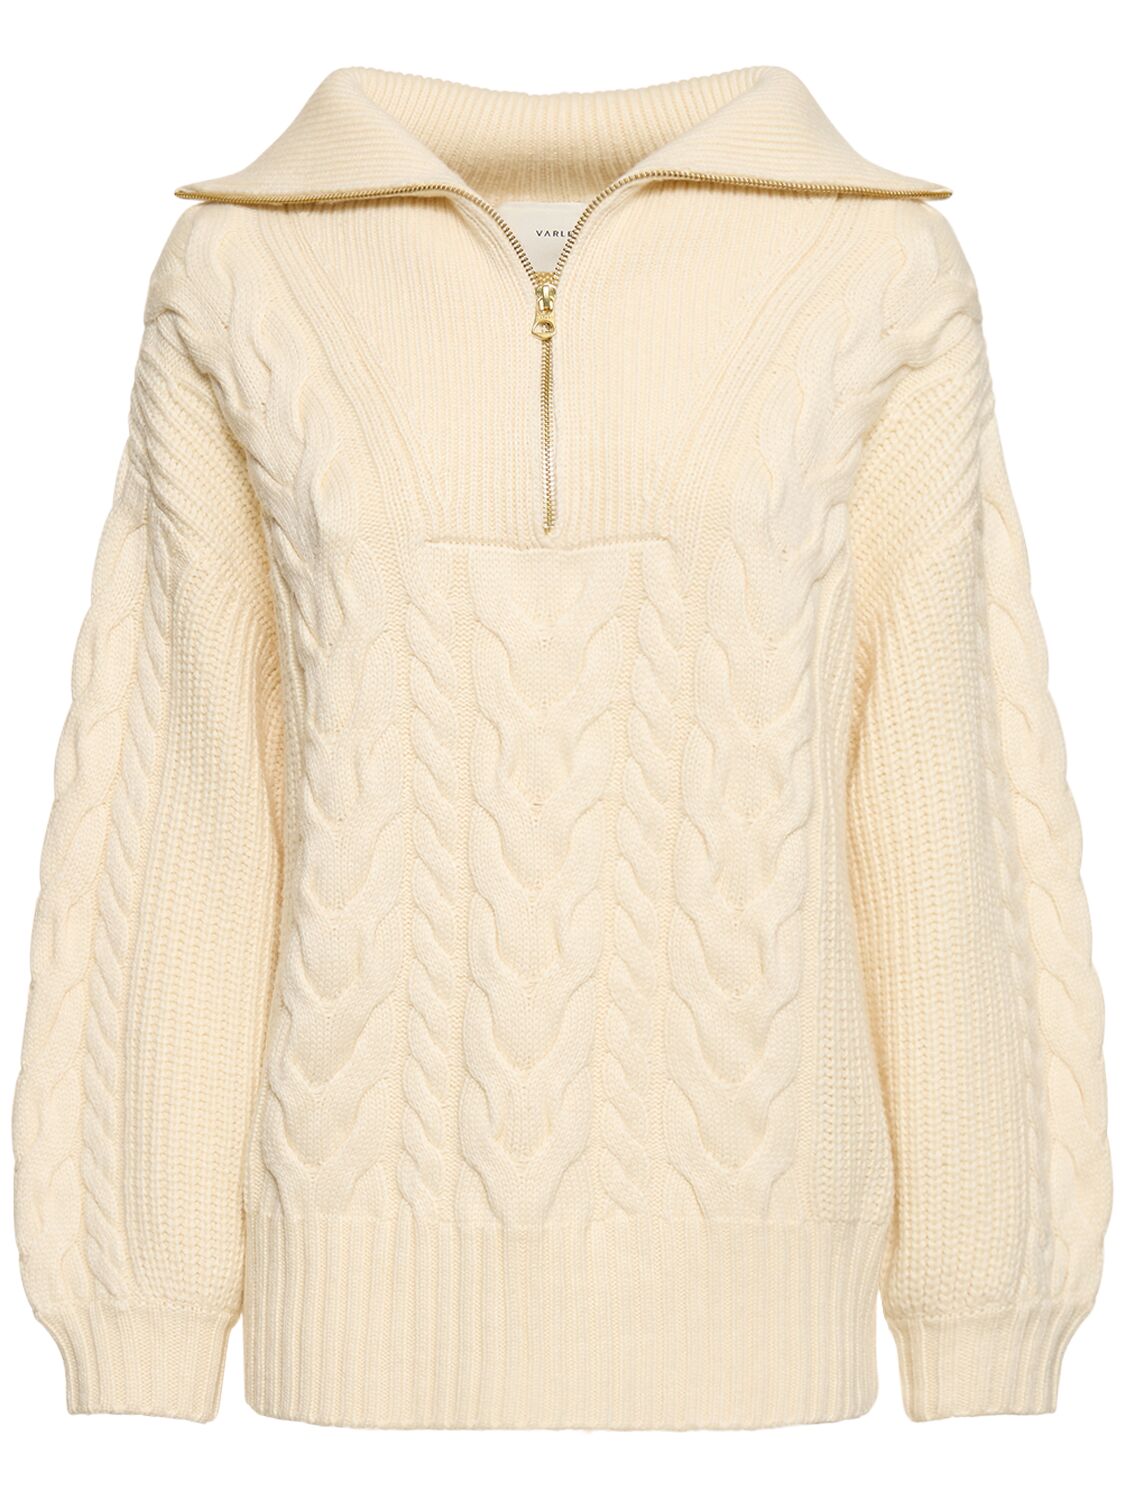 Varley Daria Half Zip Cable Knit Sweater In Beige,white